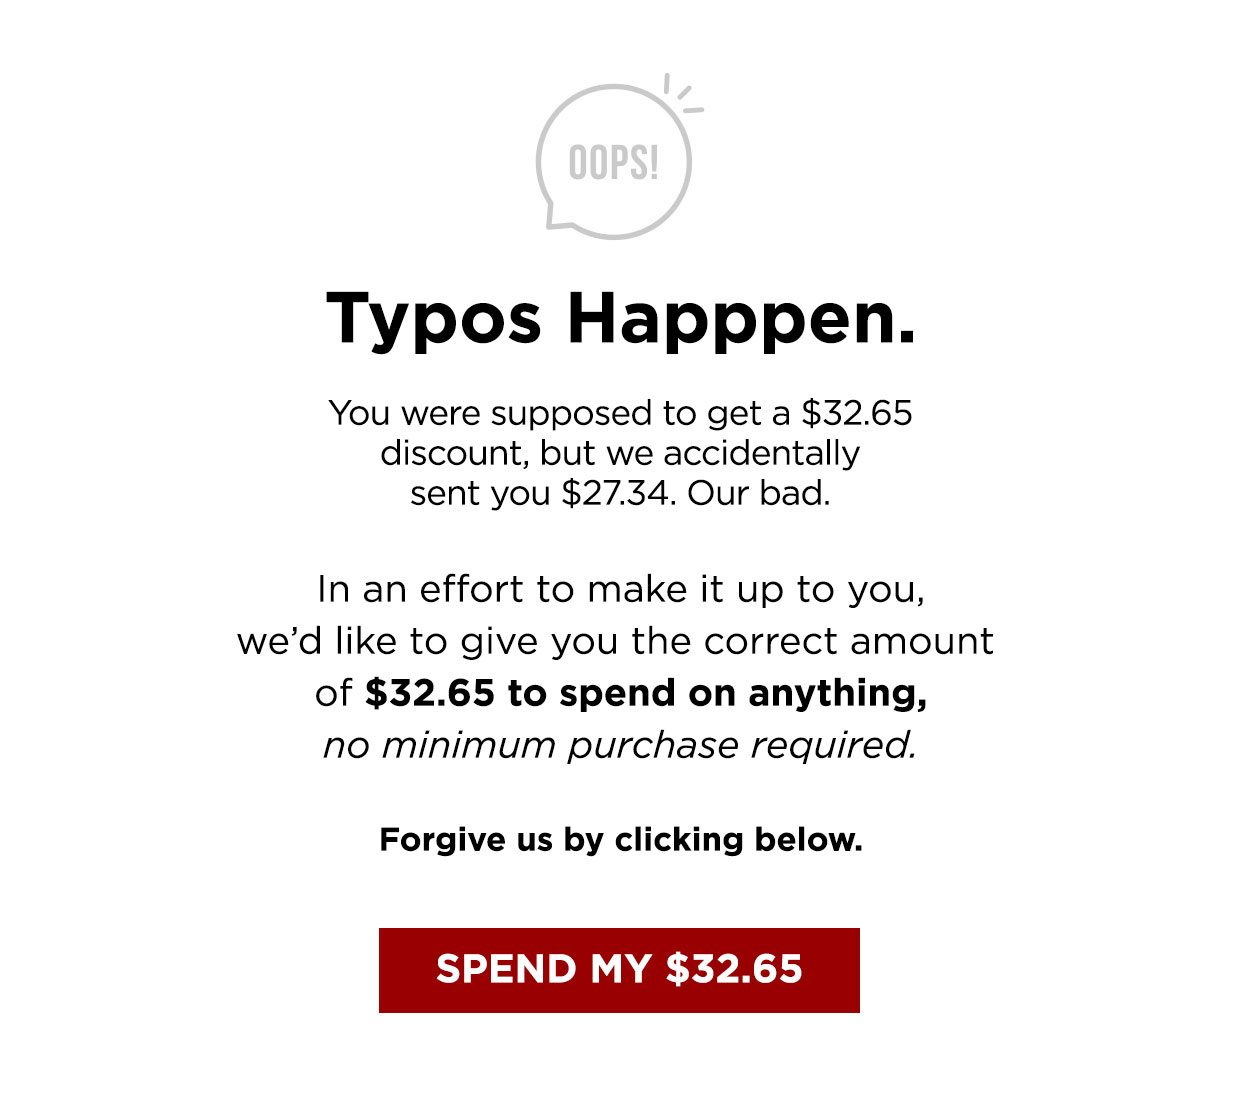 OOPS! Typos Happpen. You were supposed to get a $32.65 discount, but we accidentally sent you $27.34. Our bad. In an effort to make it up to you, we'd like to give you the correct amount of $32.65 to spend on anything, no minimum purchase required. Forgive us by clicking below.